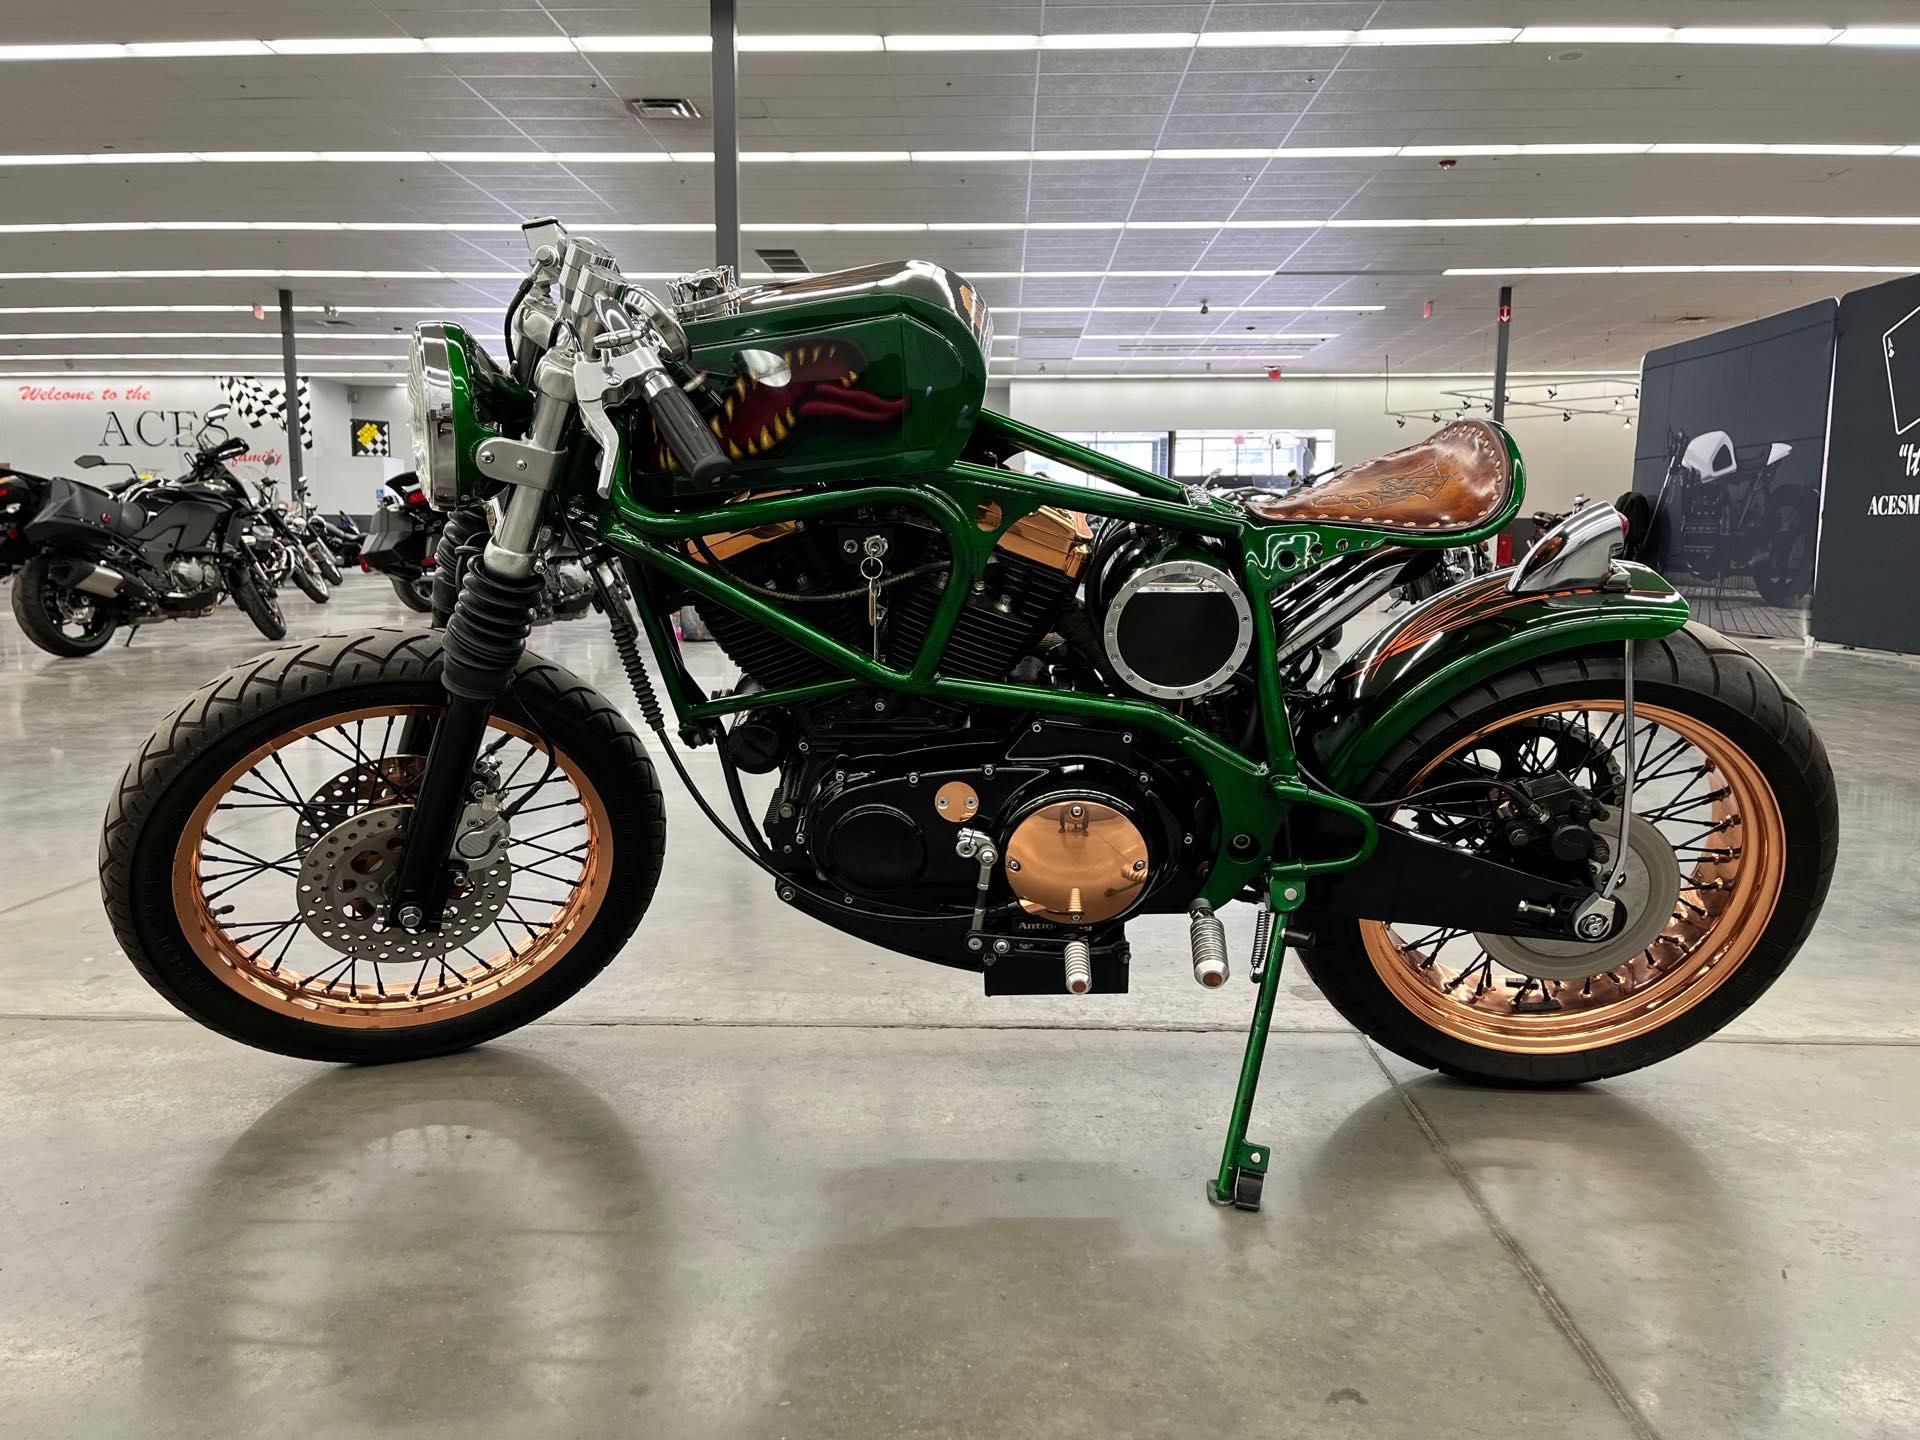 2000 BUELL M2 CYCLONE at Aces Motorcycles - Denver